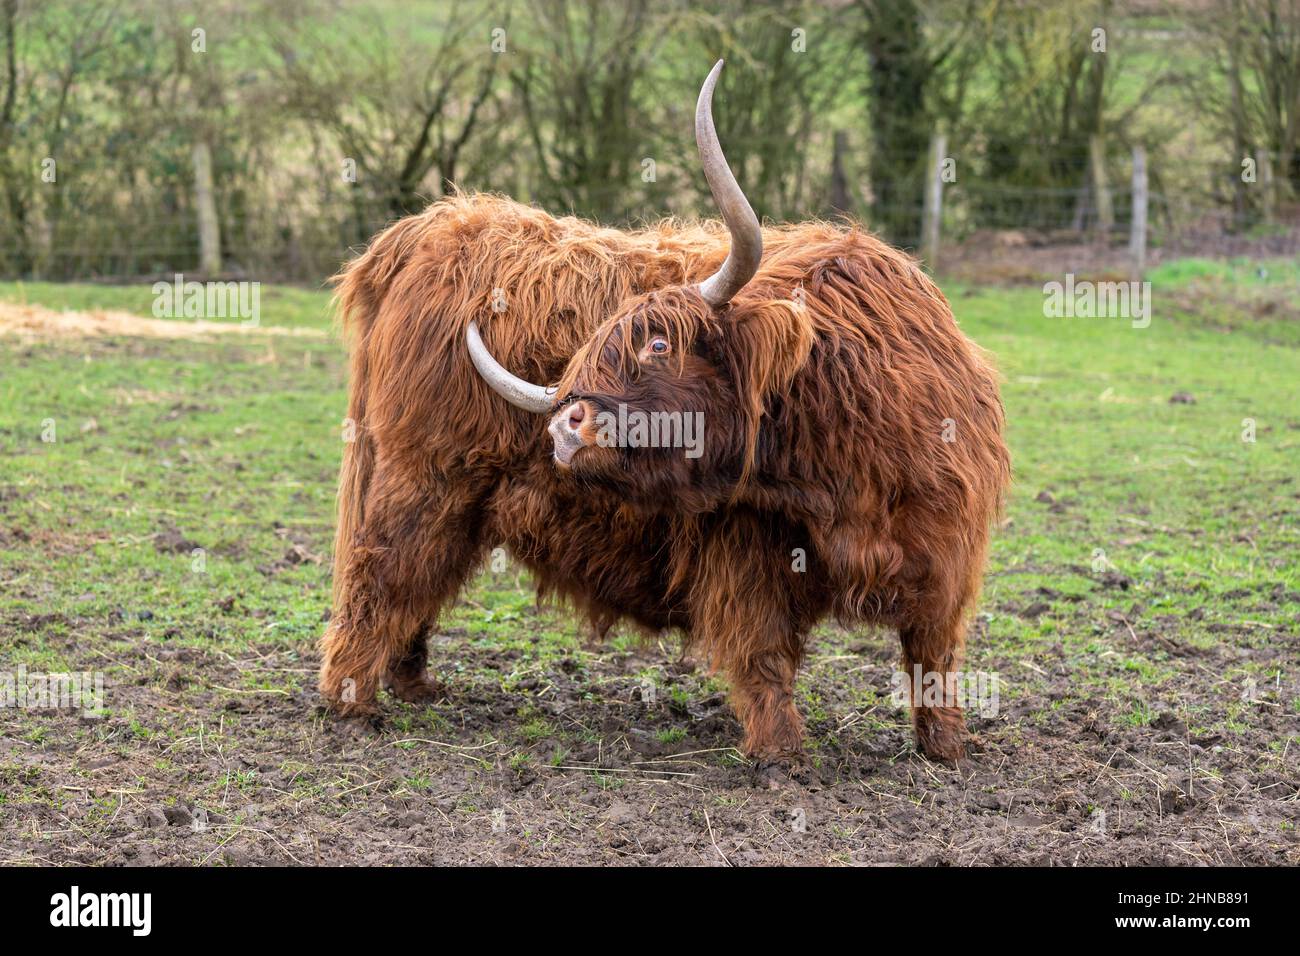 Highland cow with reddish brown coat scratching himself with its horn in a meadow in winter. Stock Photo